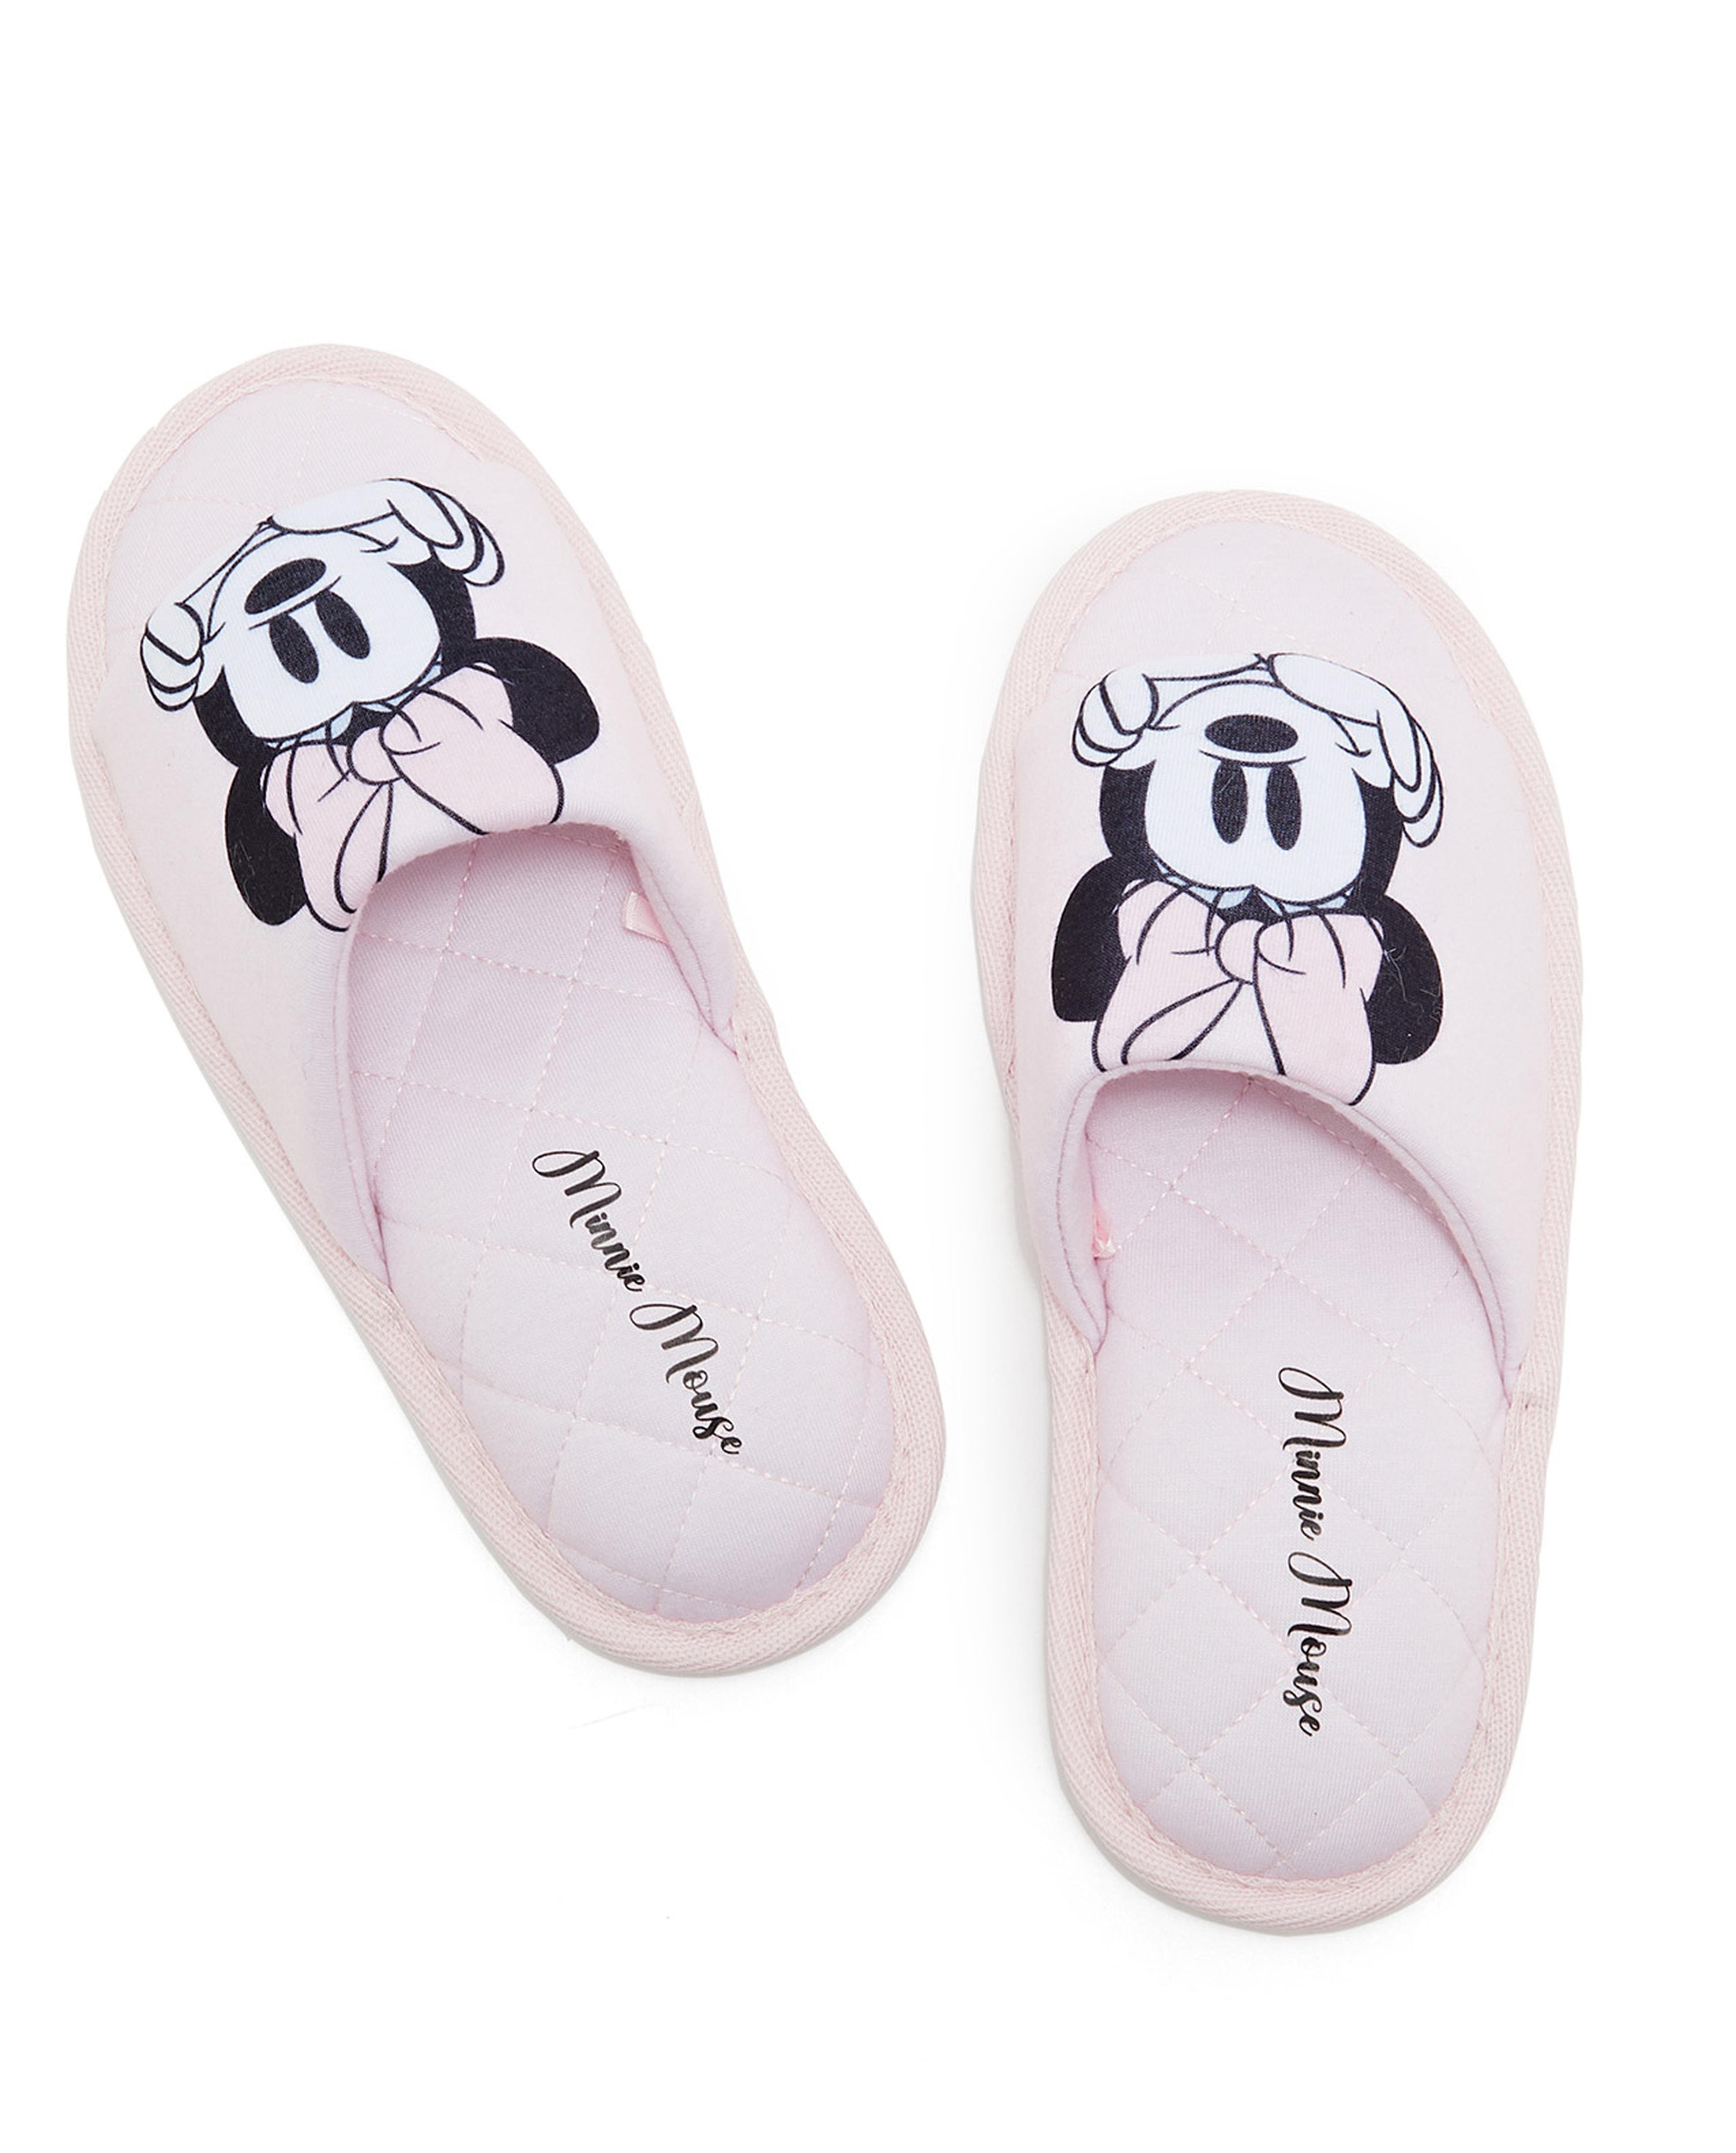 Minnie Mouse Print Bedroom Slippers